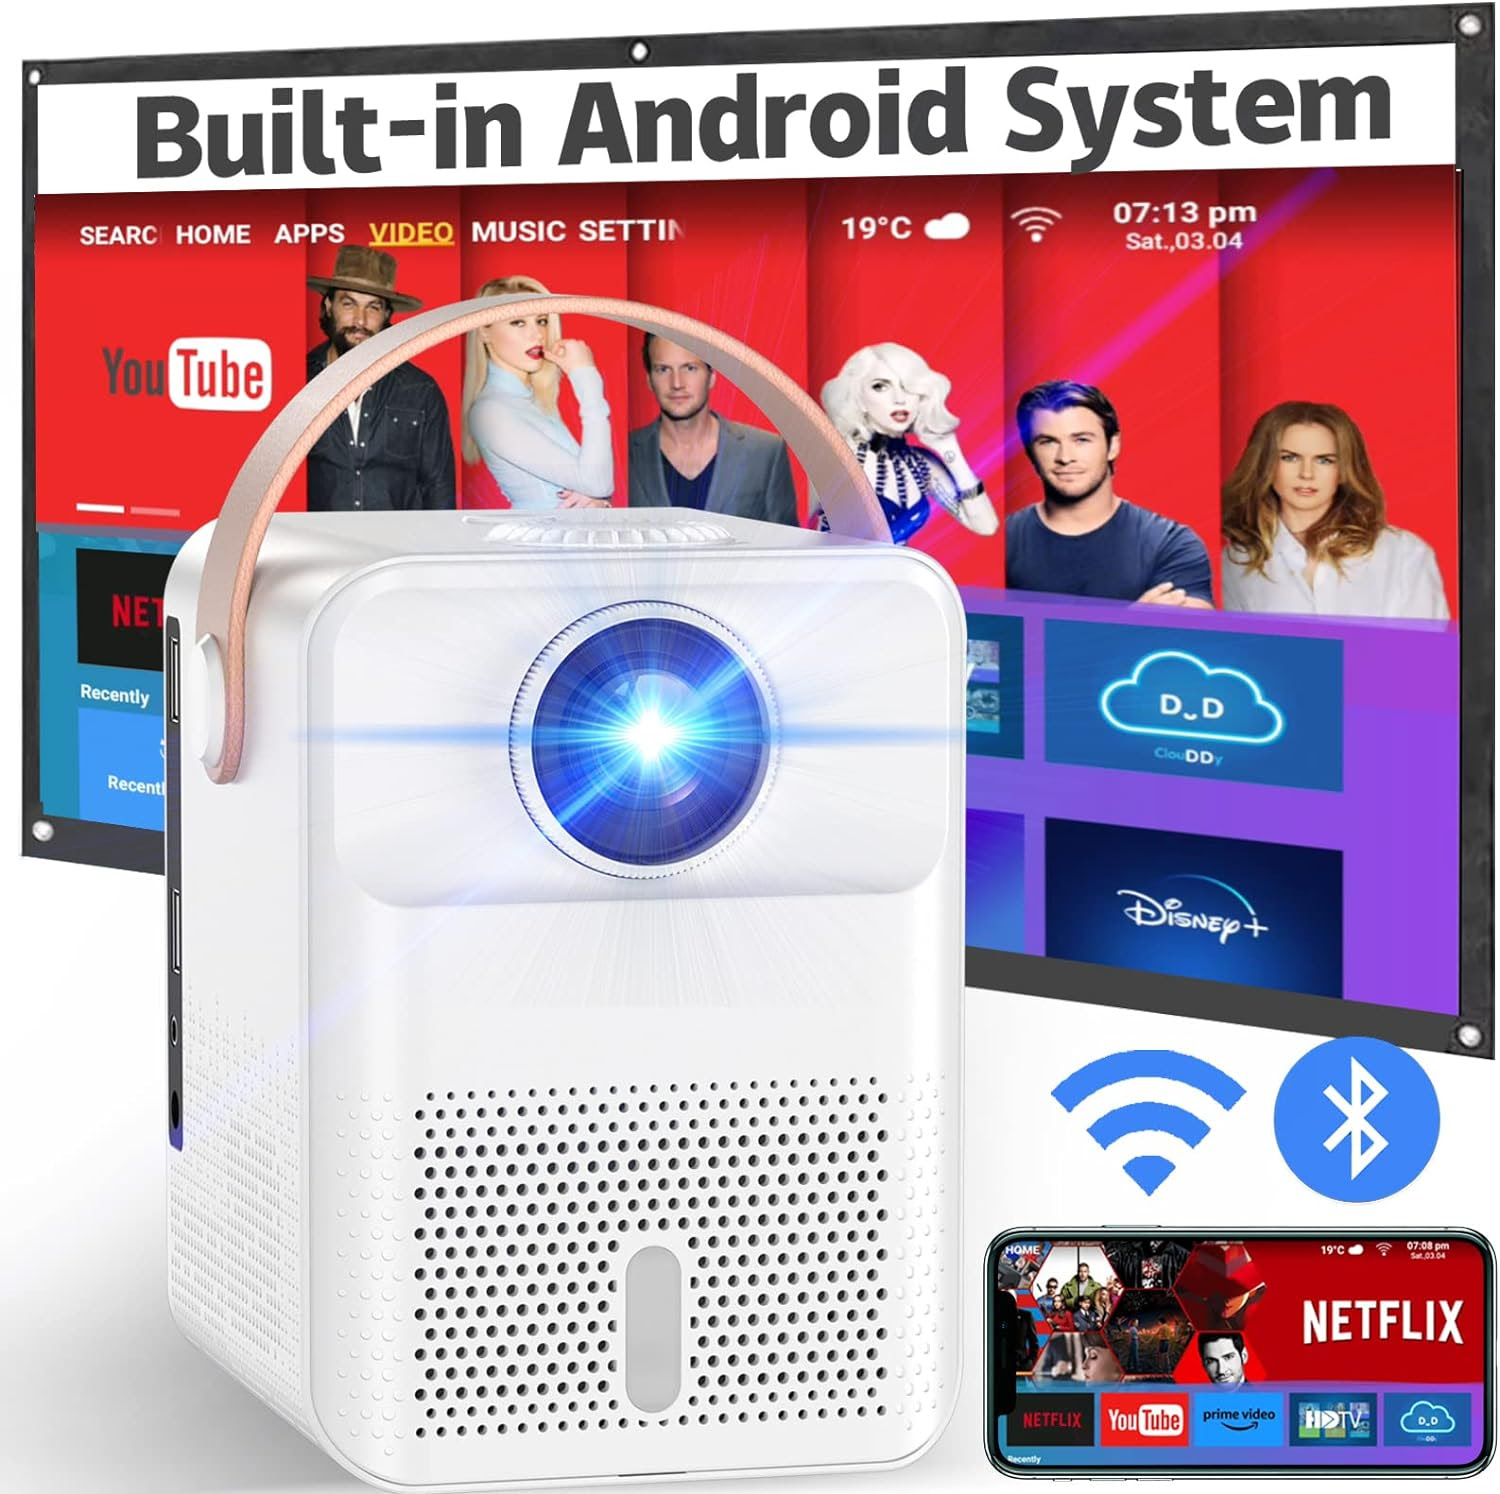 Smart Projector 4K Android System. 576 units. EXW Los Angeles $37.00 unit.